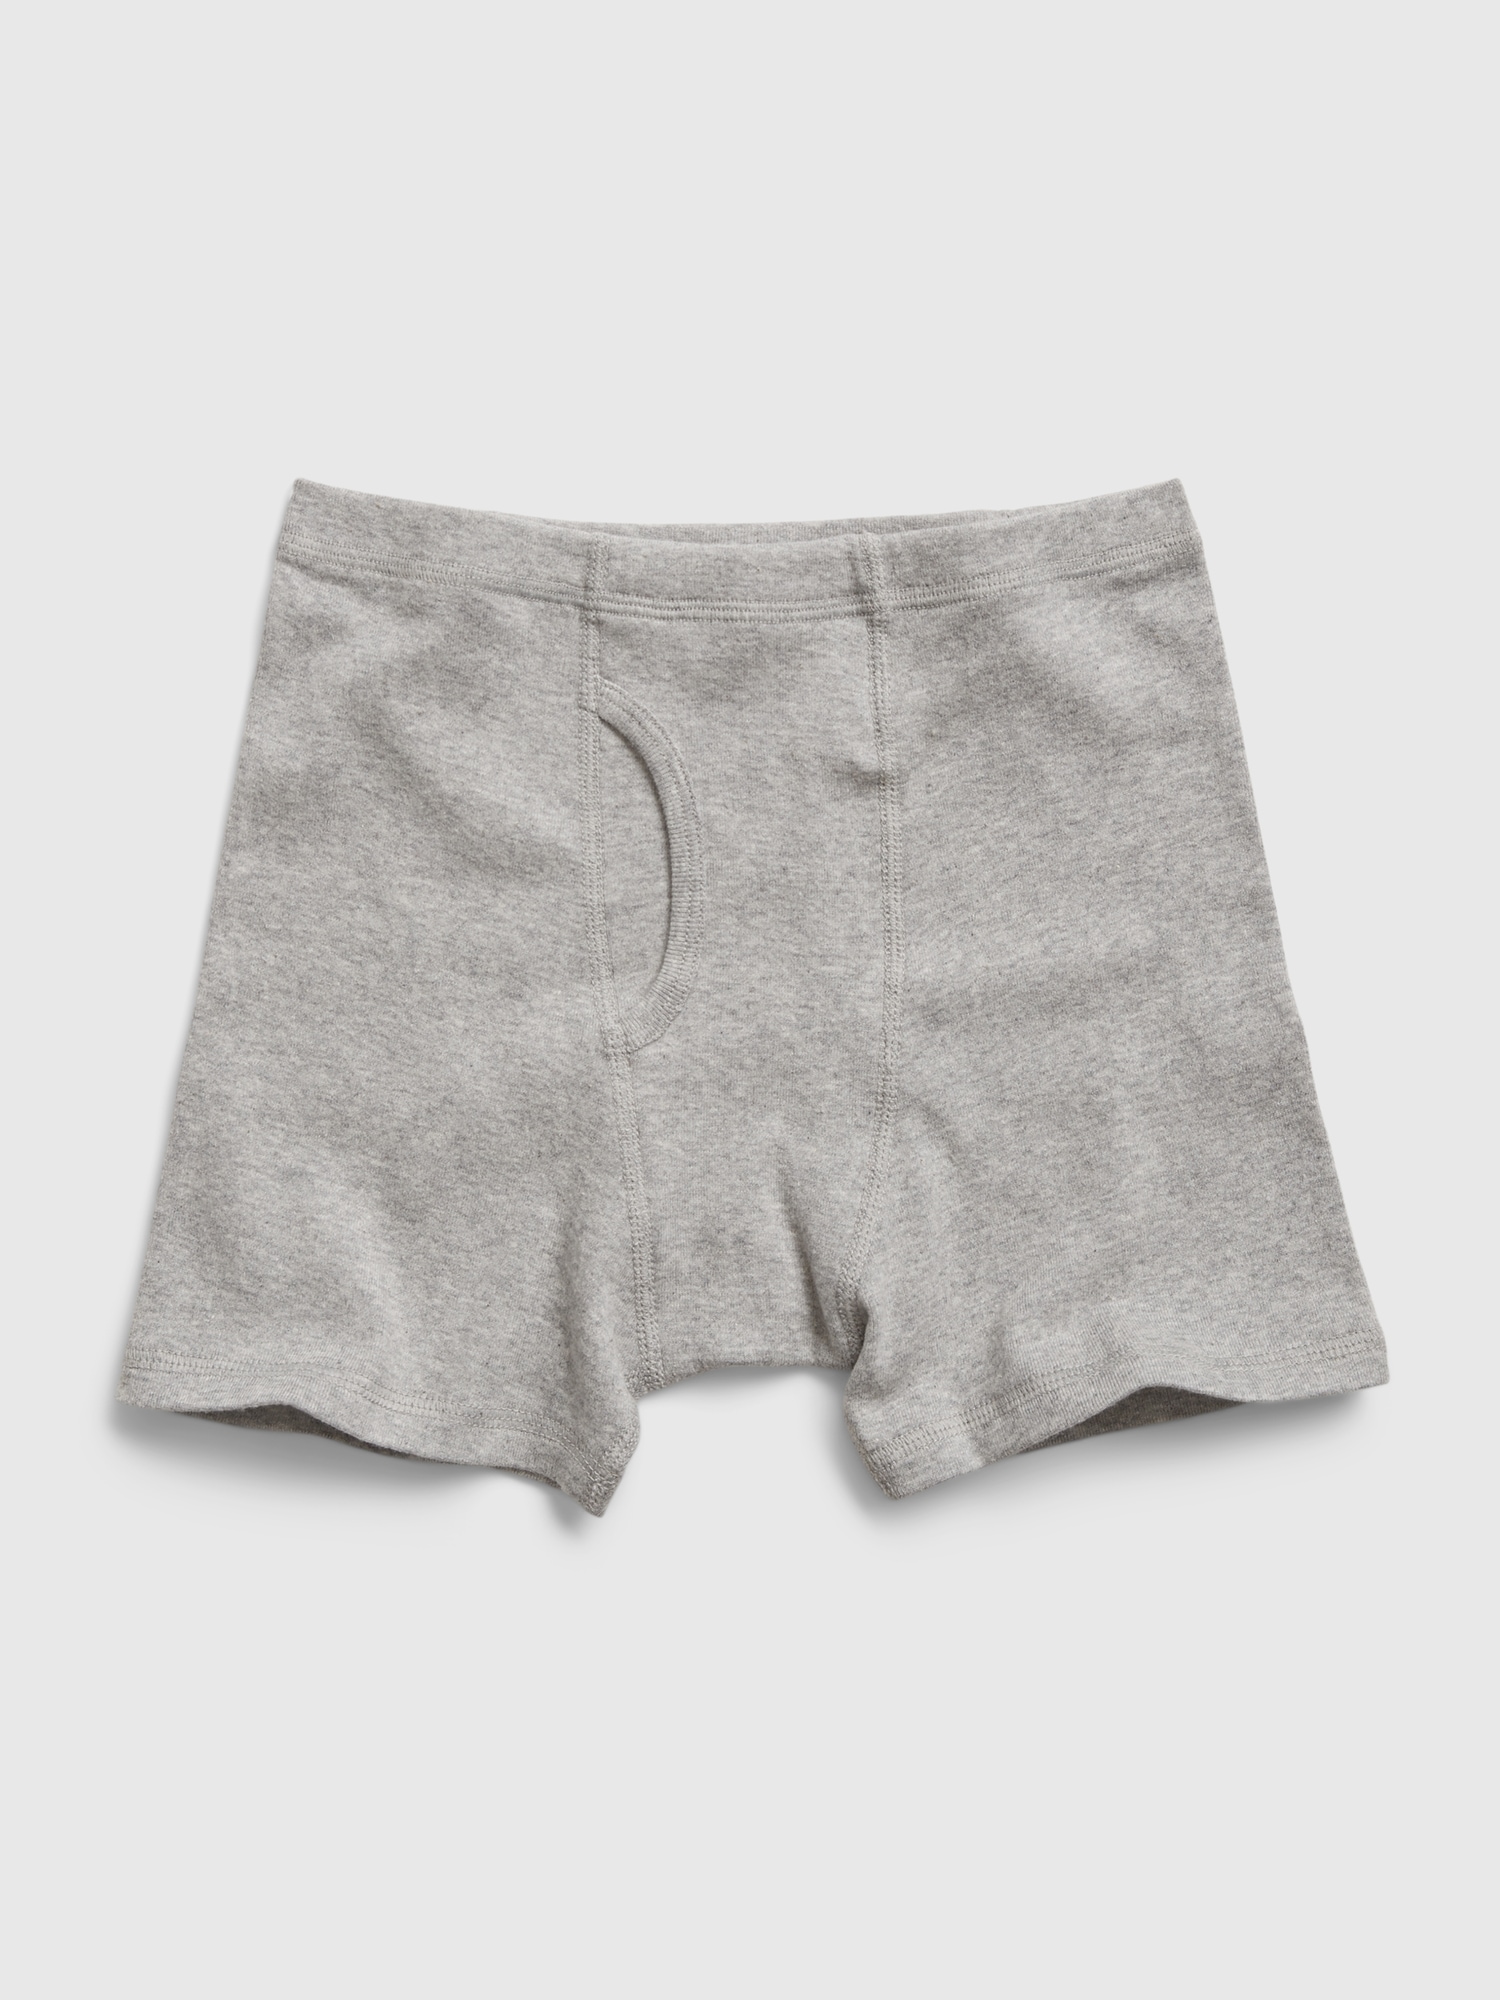 7-pack Boxer Shorts - Light gray/days of the week - Kids